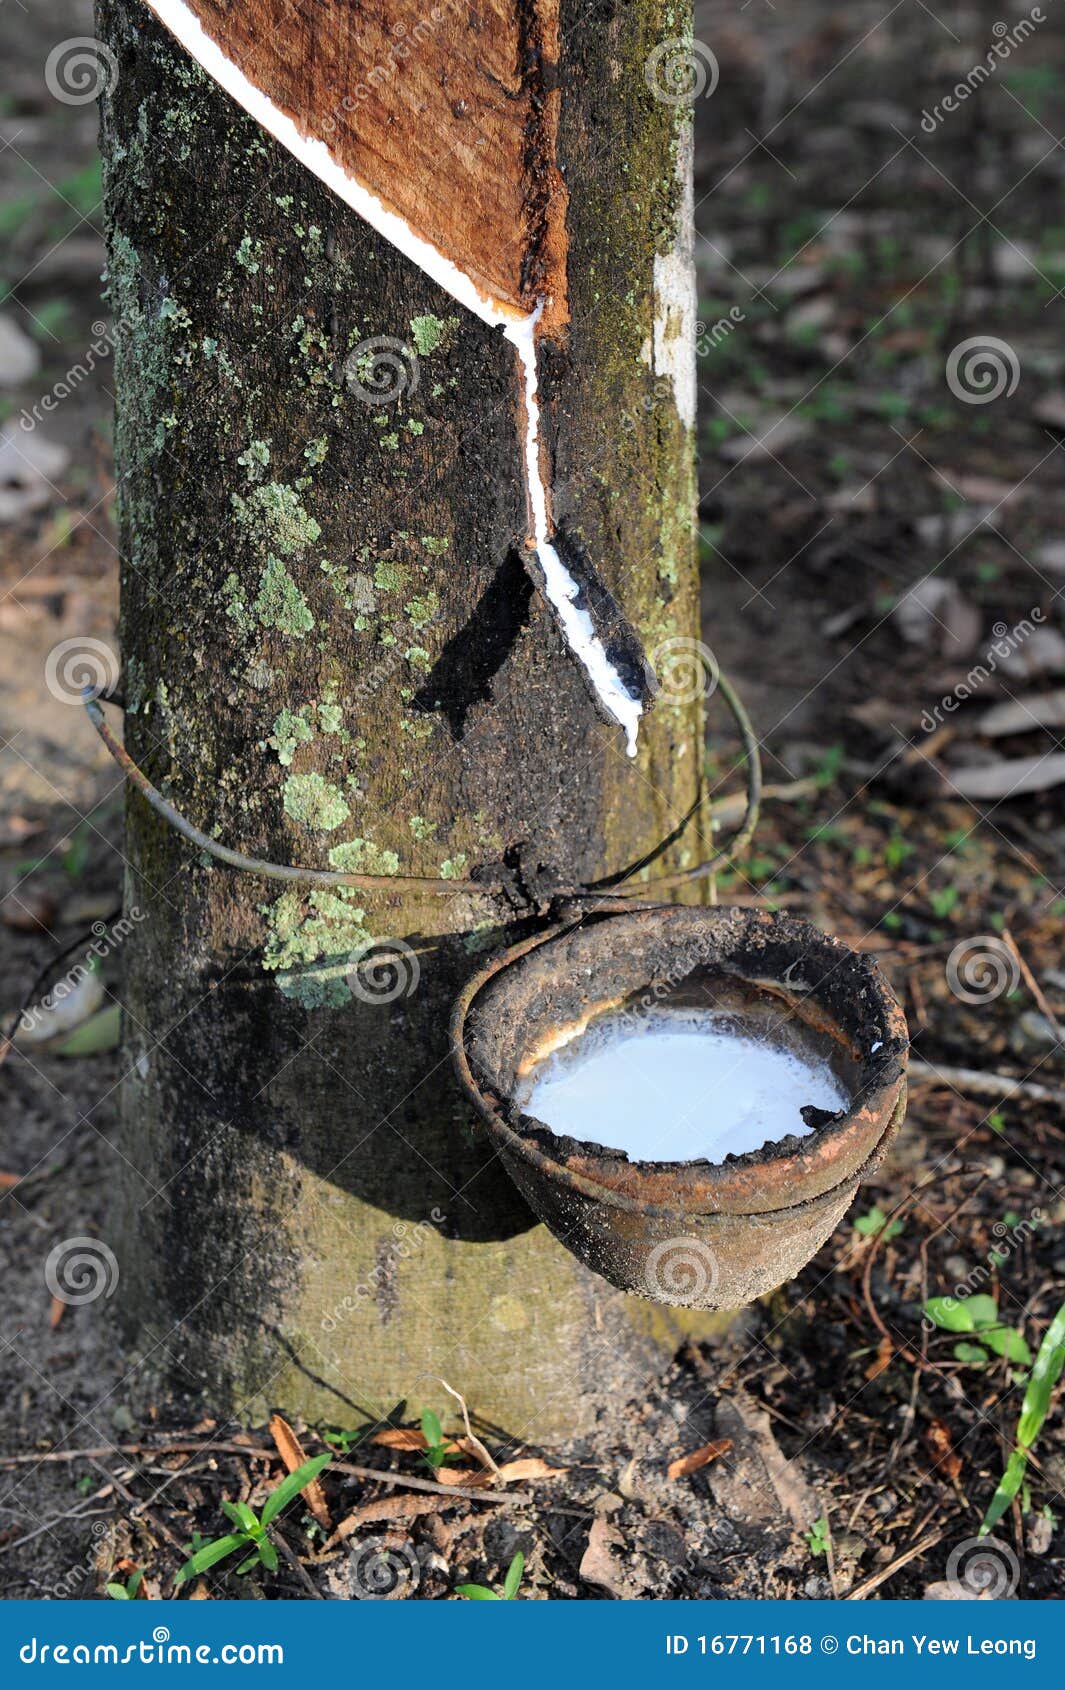 rubber tree and latex